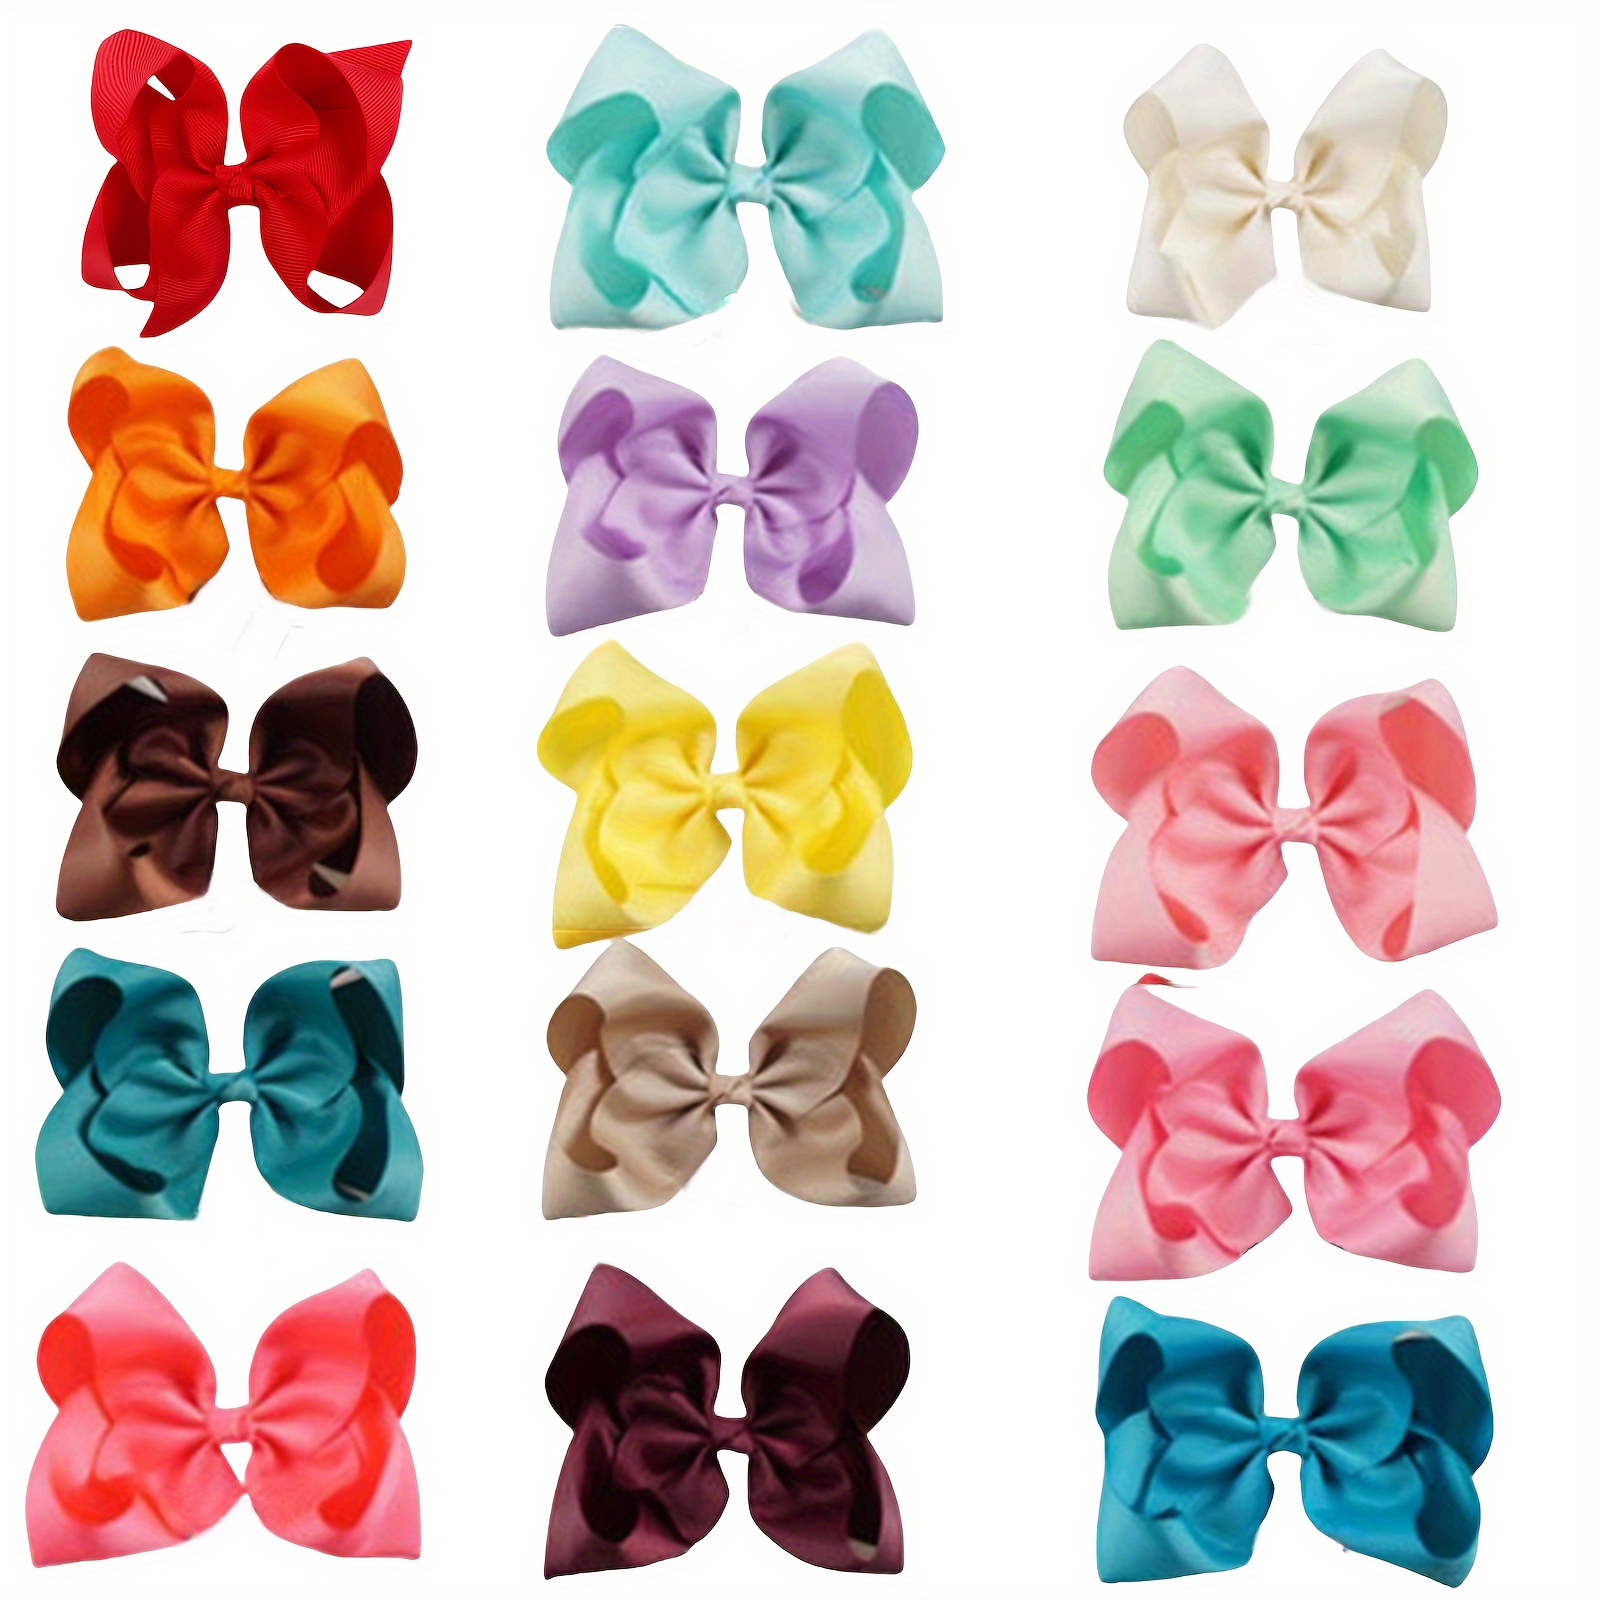 

15 Pieces Satin Ribbon Bow Hair Clips For Girls, Large Butterfly Bow Alligator Hair Pins, Cute Y2k Style Bow Tie Hair Accessories For Teens, Solid Color Fabric Bow Hair Clips Set, Assorted Colors